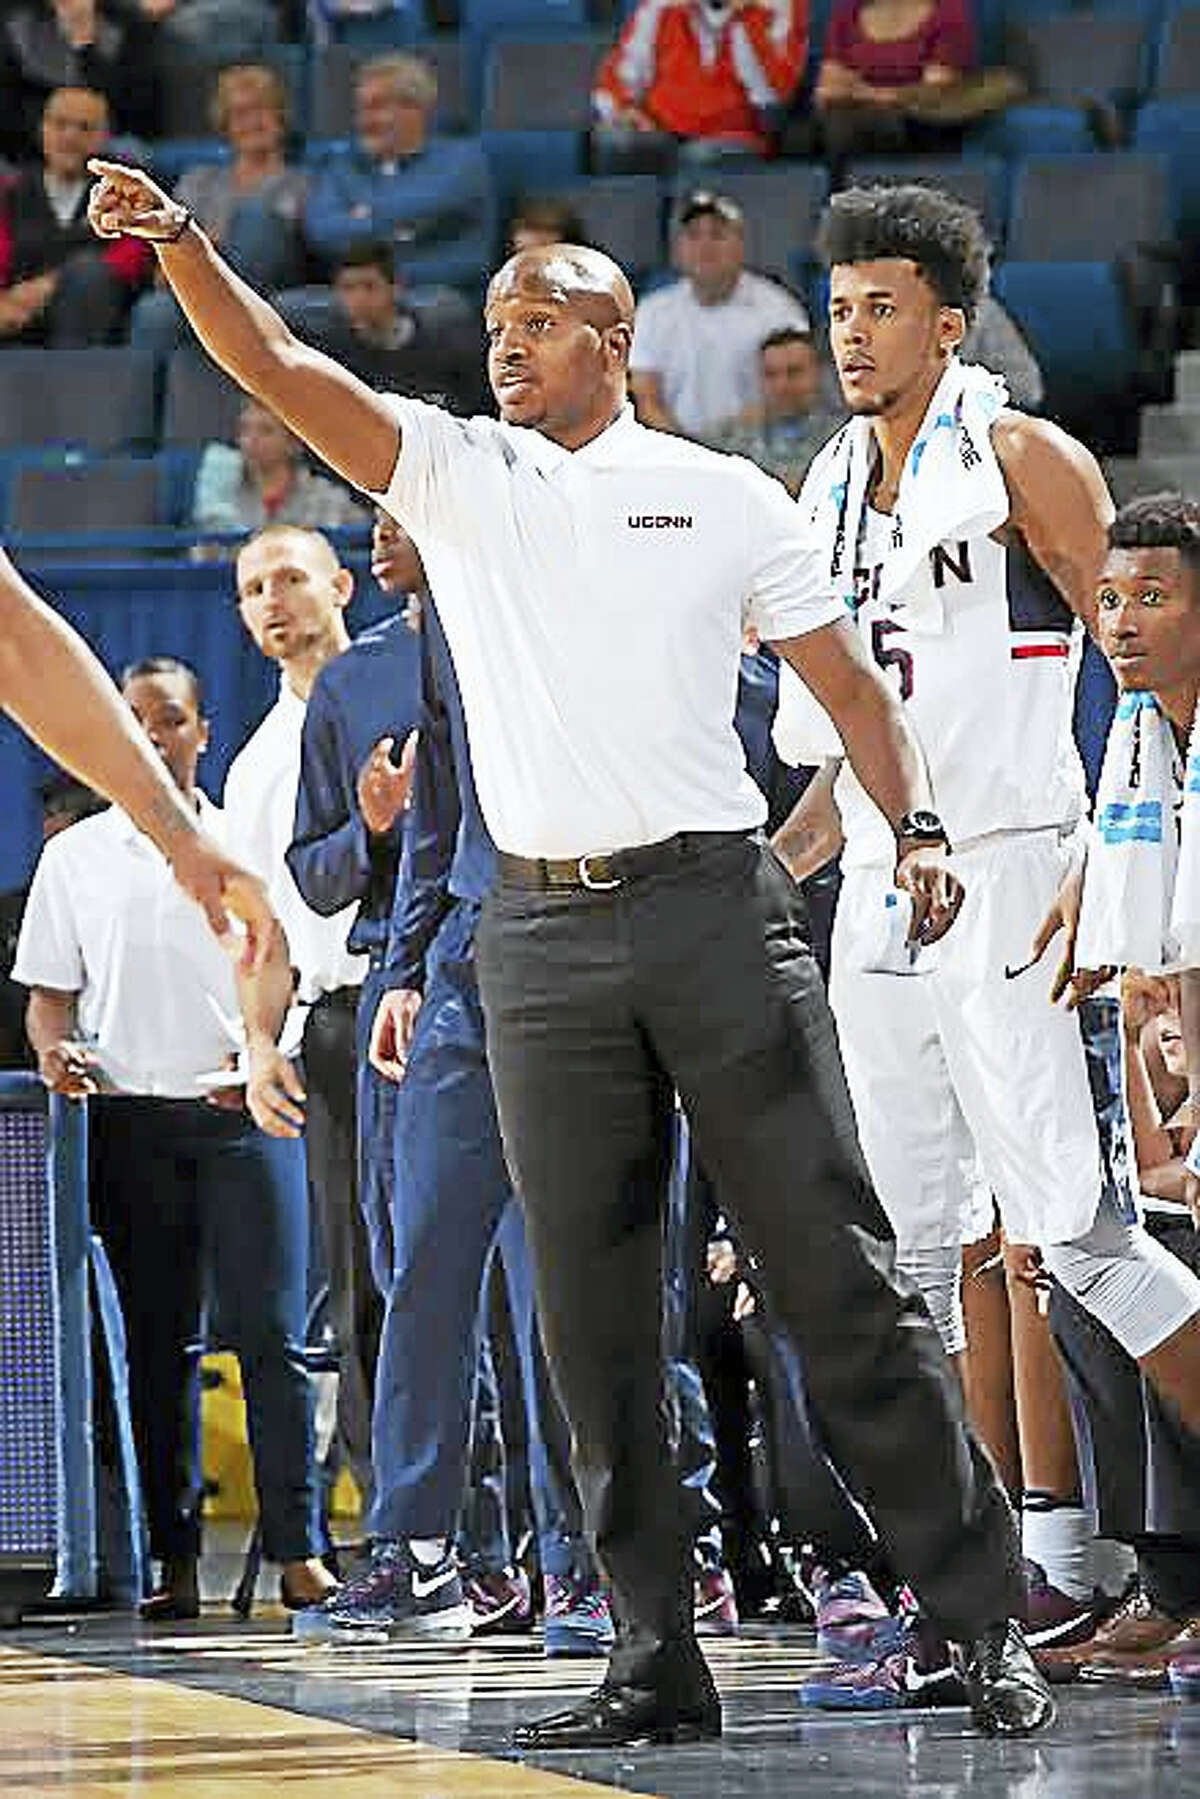 Dwayne Killings joined UConn's coaching staff this season after spending eight seasons at Temple.Photo courtesy of UConn athletics